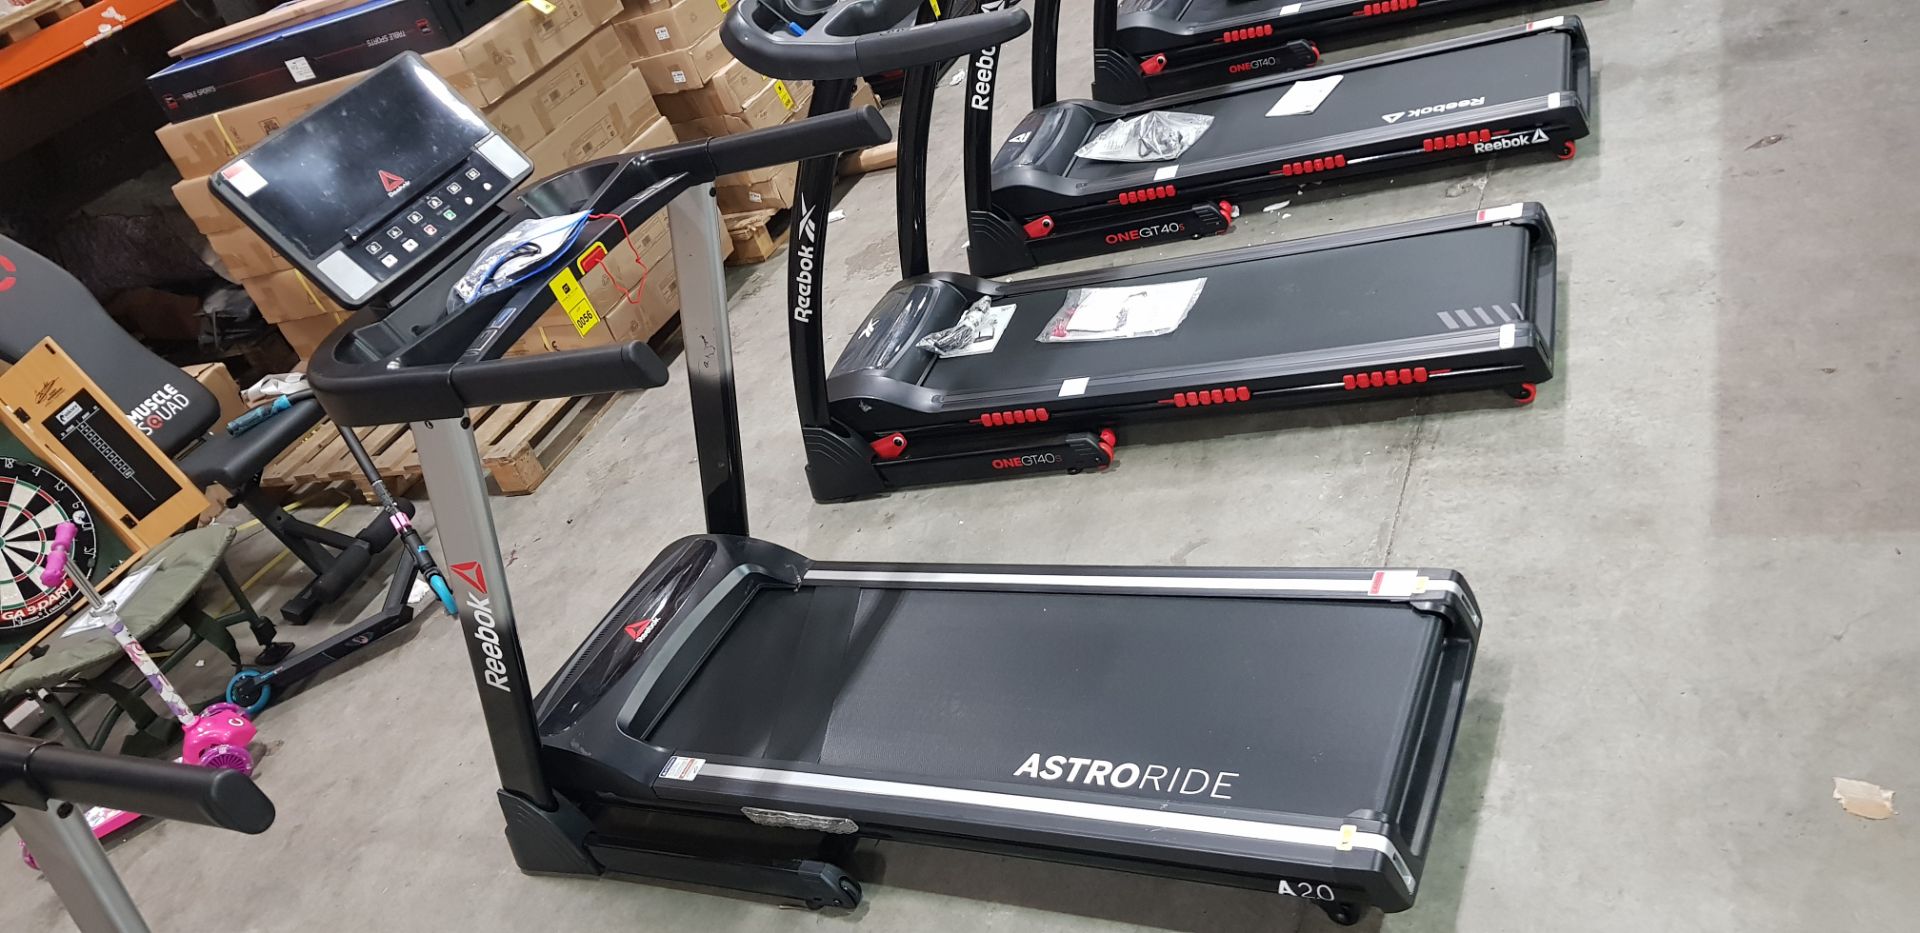 1 X REEBOK A2.0 ASTRORIDE TREADMILL - INCLUDES ATTACHMENTS ( FULLY WORKING TESTED ) - 2 MANUAL